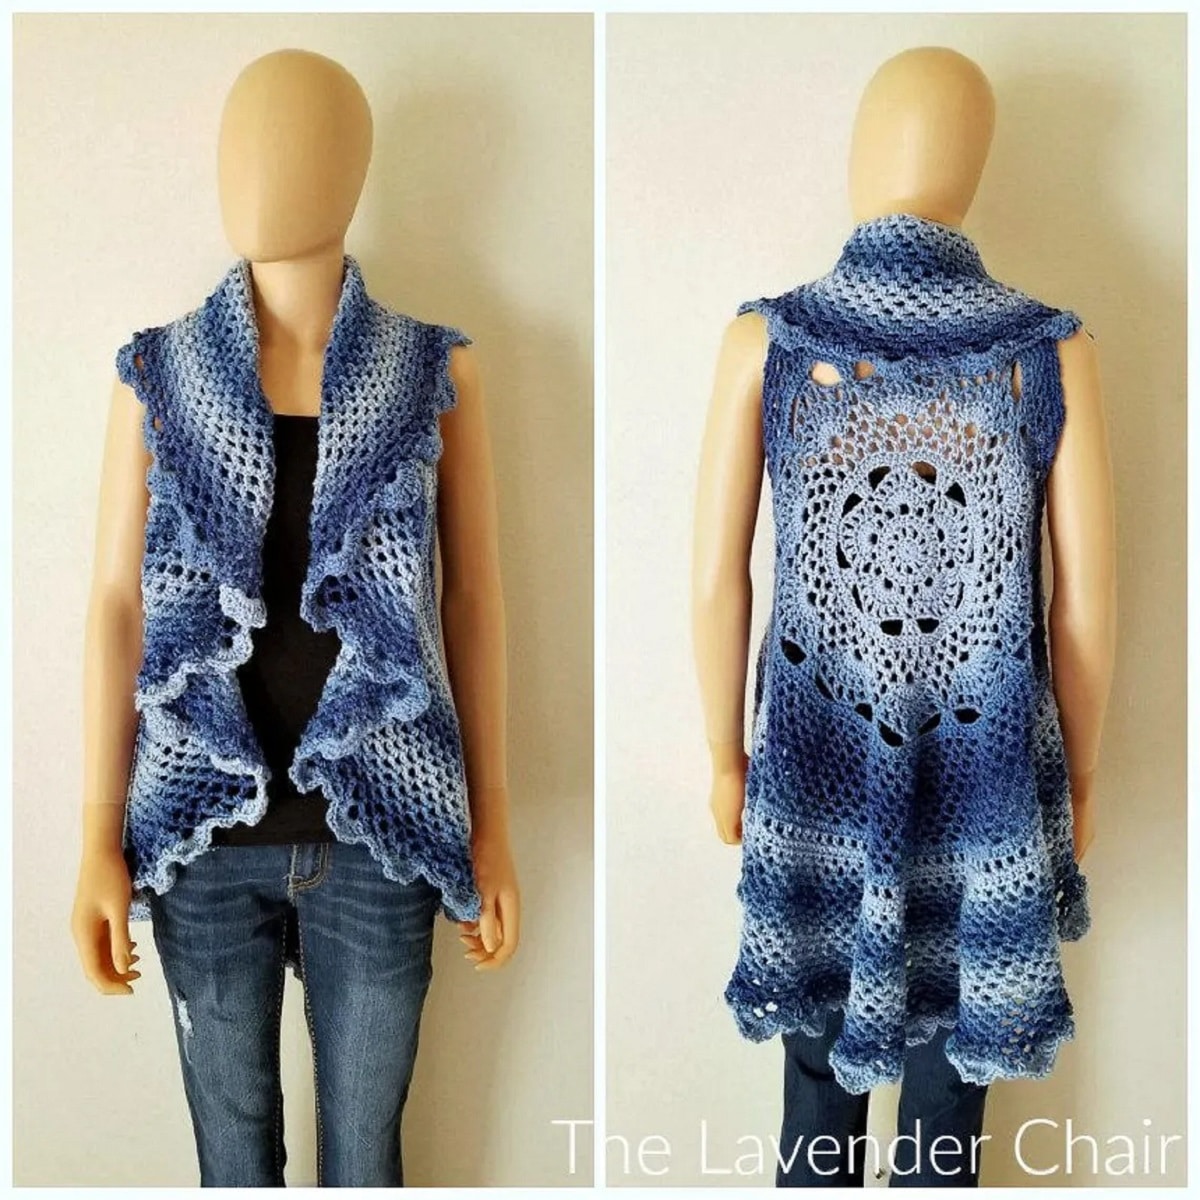 Mannequin wearing a blue and white striped crochet vest with a high collar and large white mandala on the back.